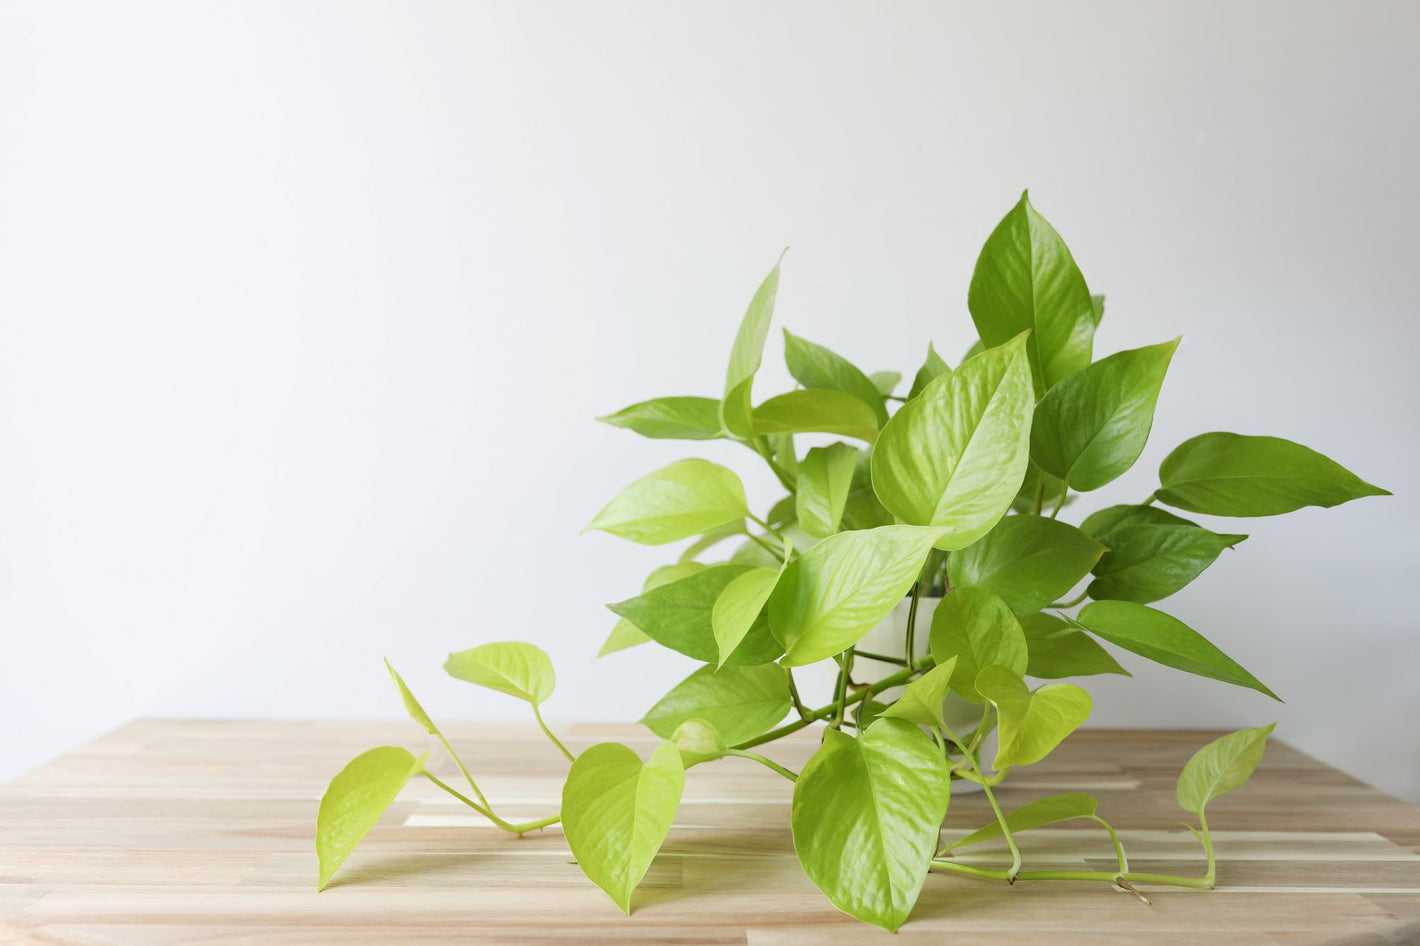 A vibrant neon pothos plant in a white pot, placed on a pine table against a white background. The leaves of the plant are bright and single-toned, but fade from a lime green color in the back of the plant to a citrus yellow in the front where new leaves vine down in front of the Epipremnum aureum plant.